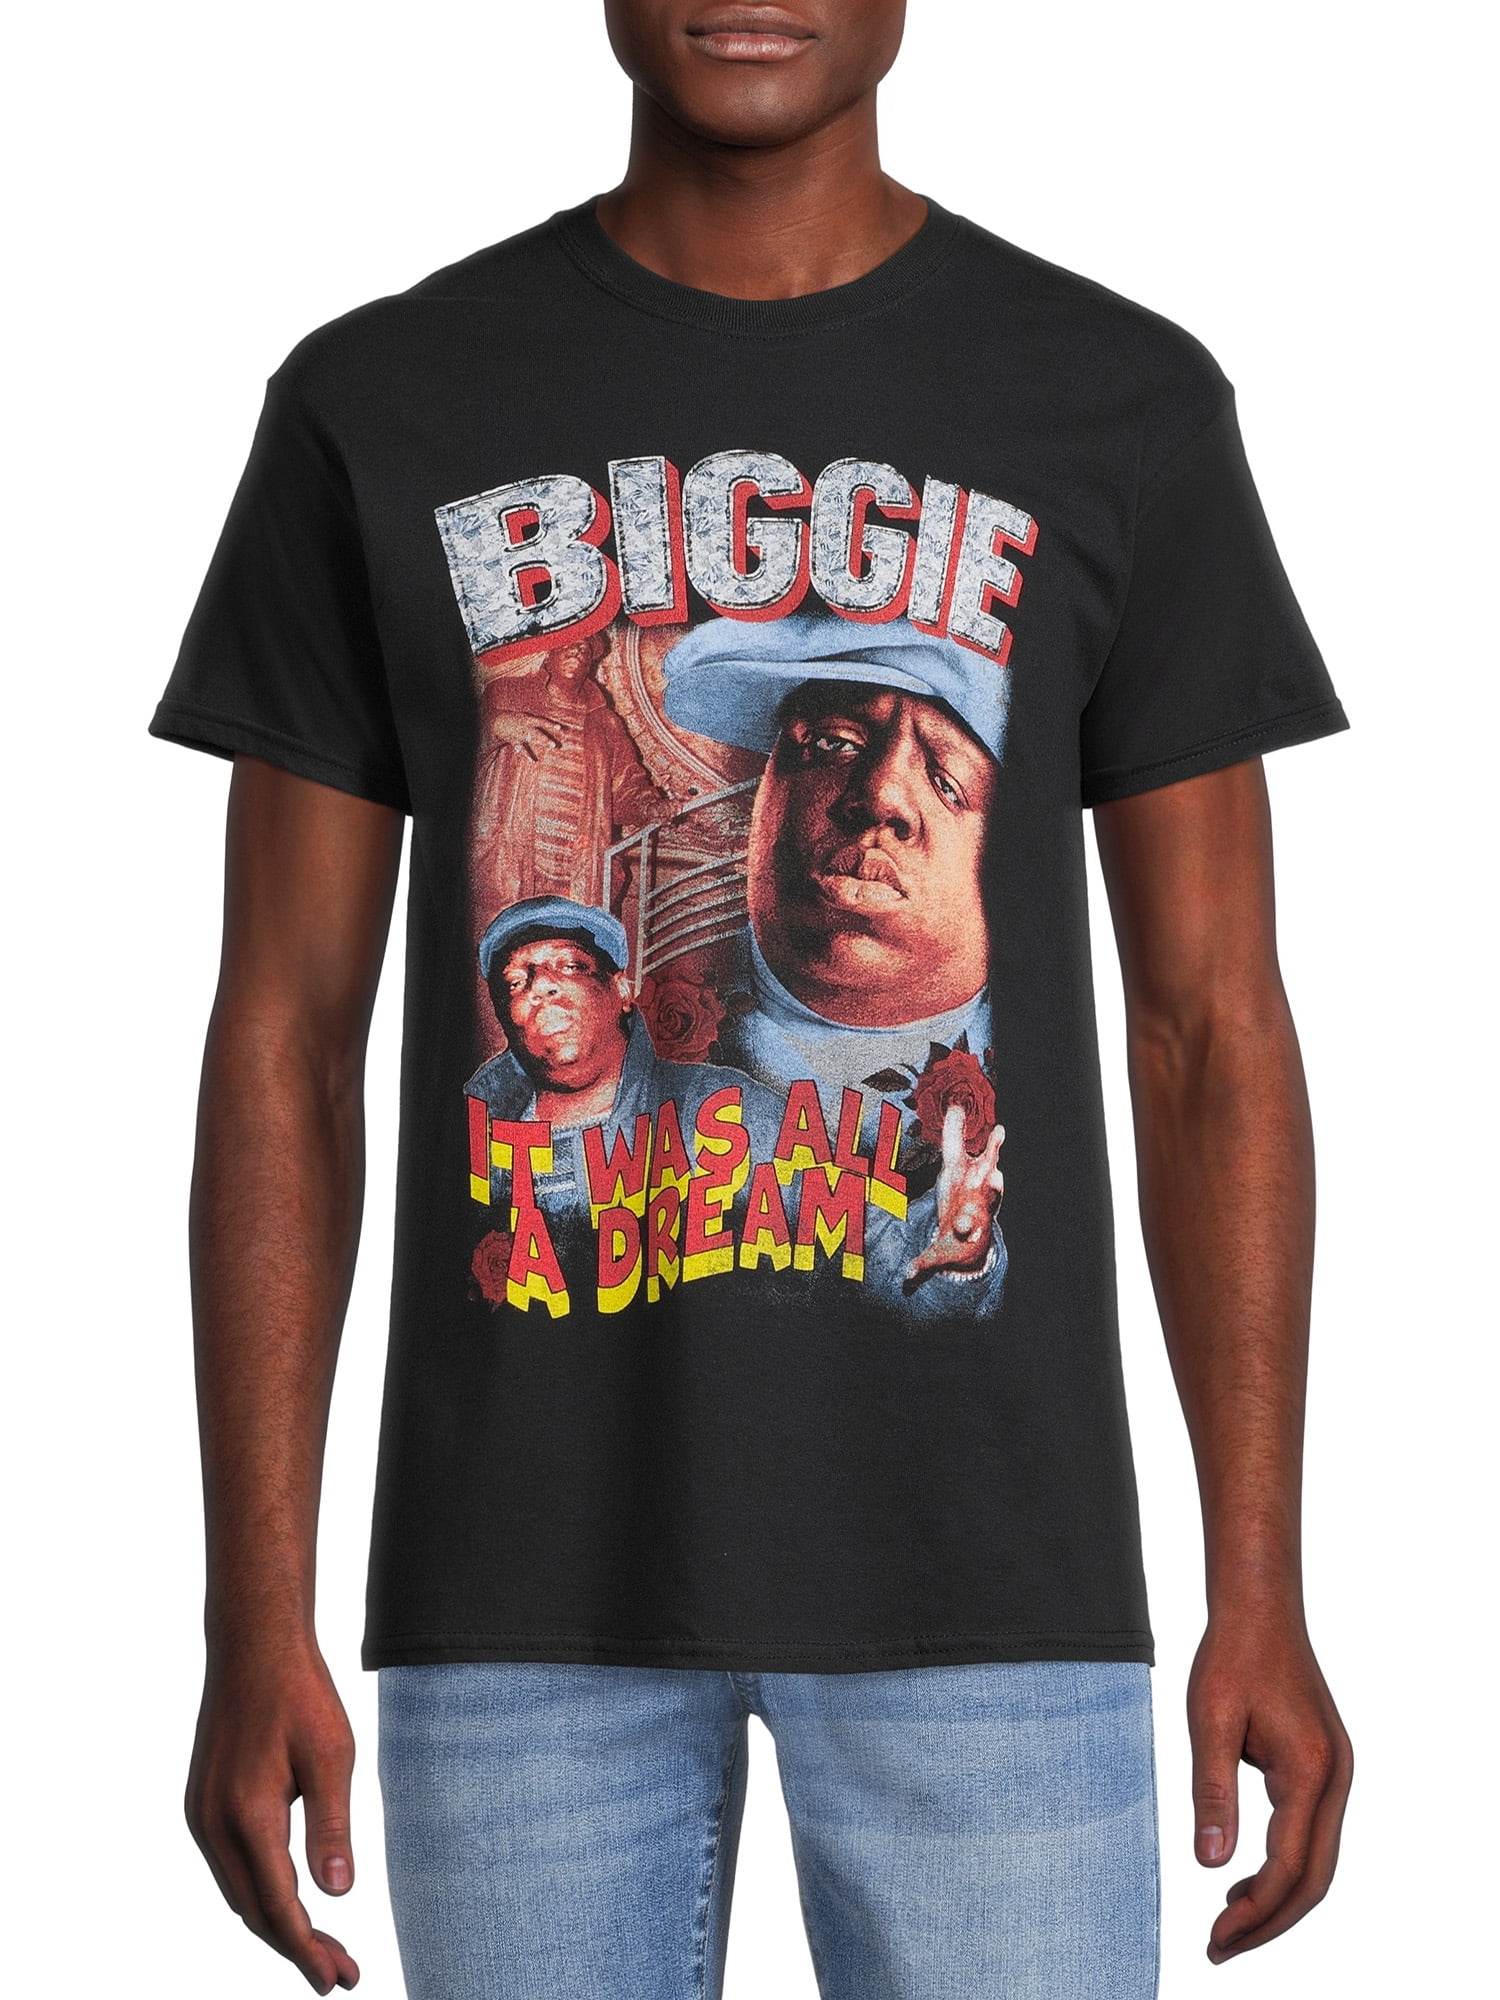 Biggie Smalls Slim Fit Casual Soft T Shirts for Men Great to Exercise Work Out Custom Gift Tee